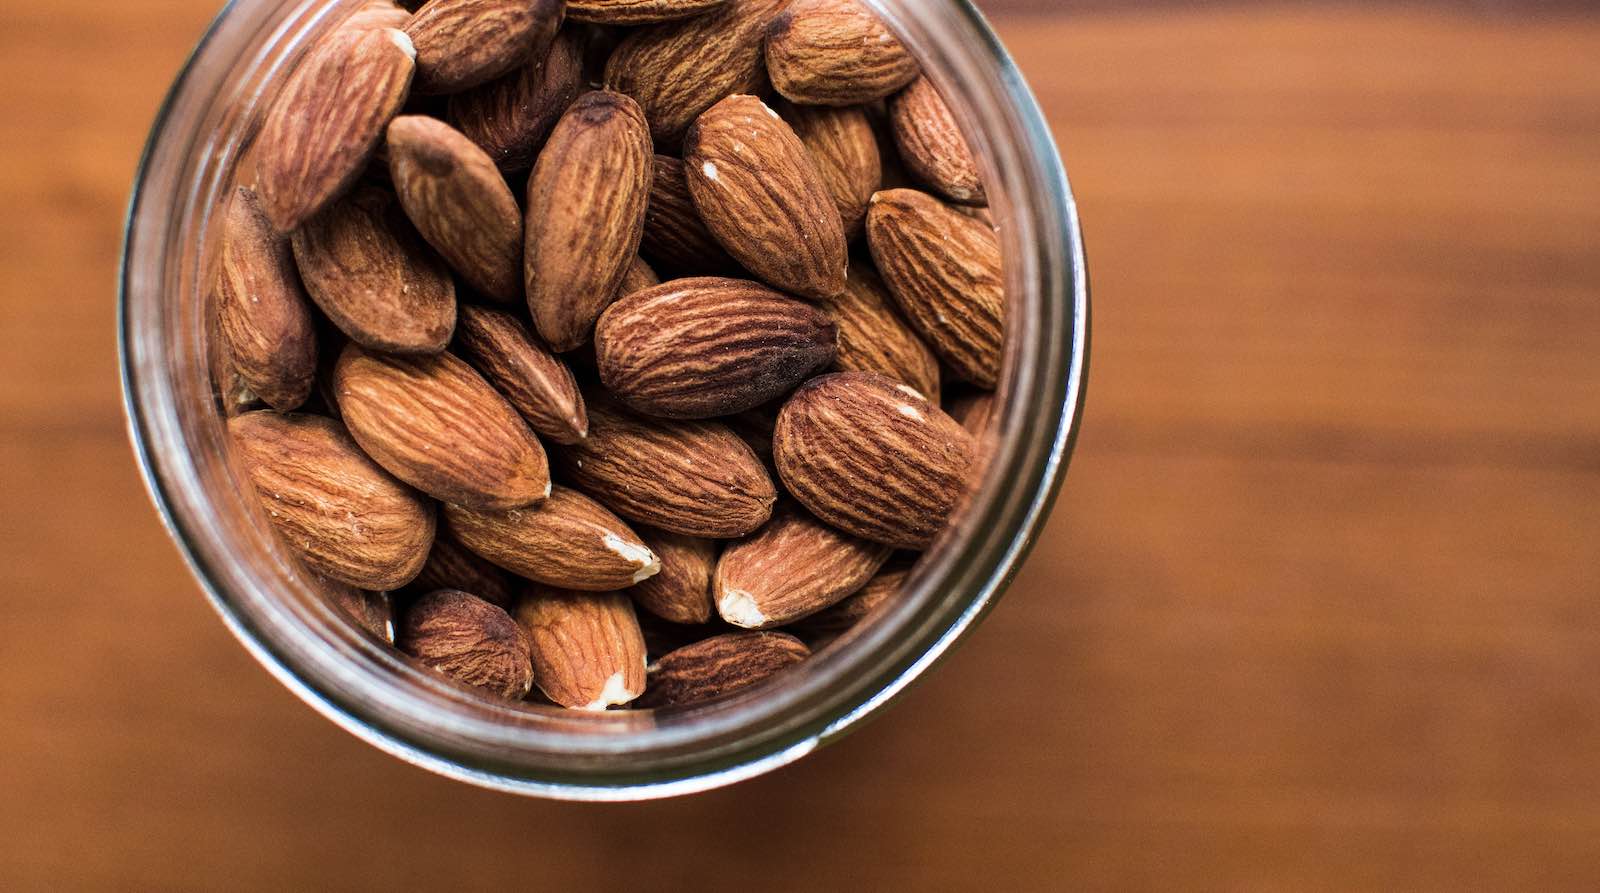 Almonds as a fasting mimicking diet food